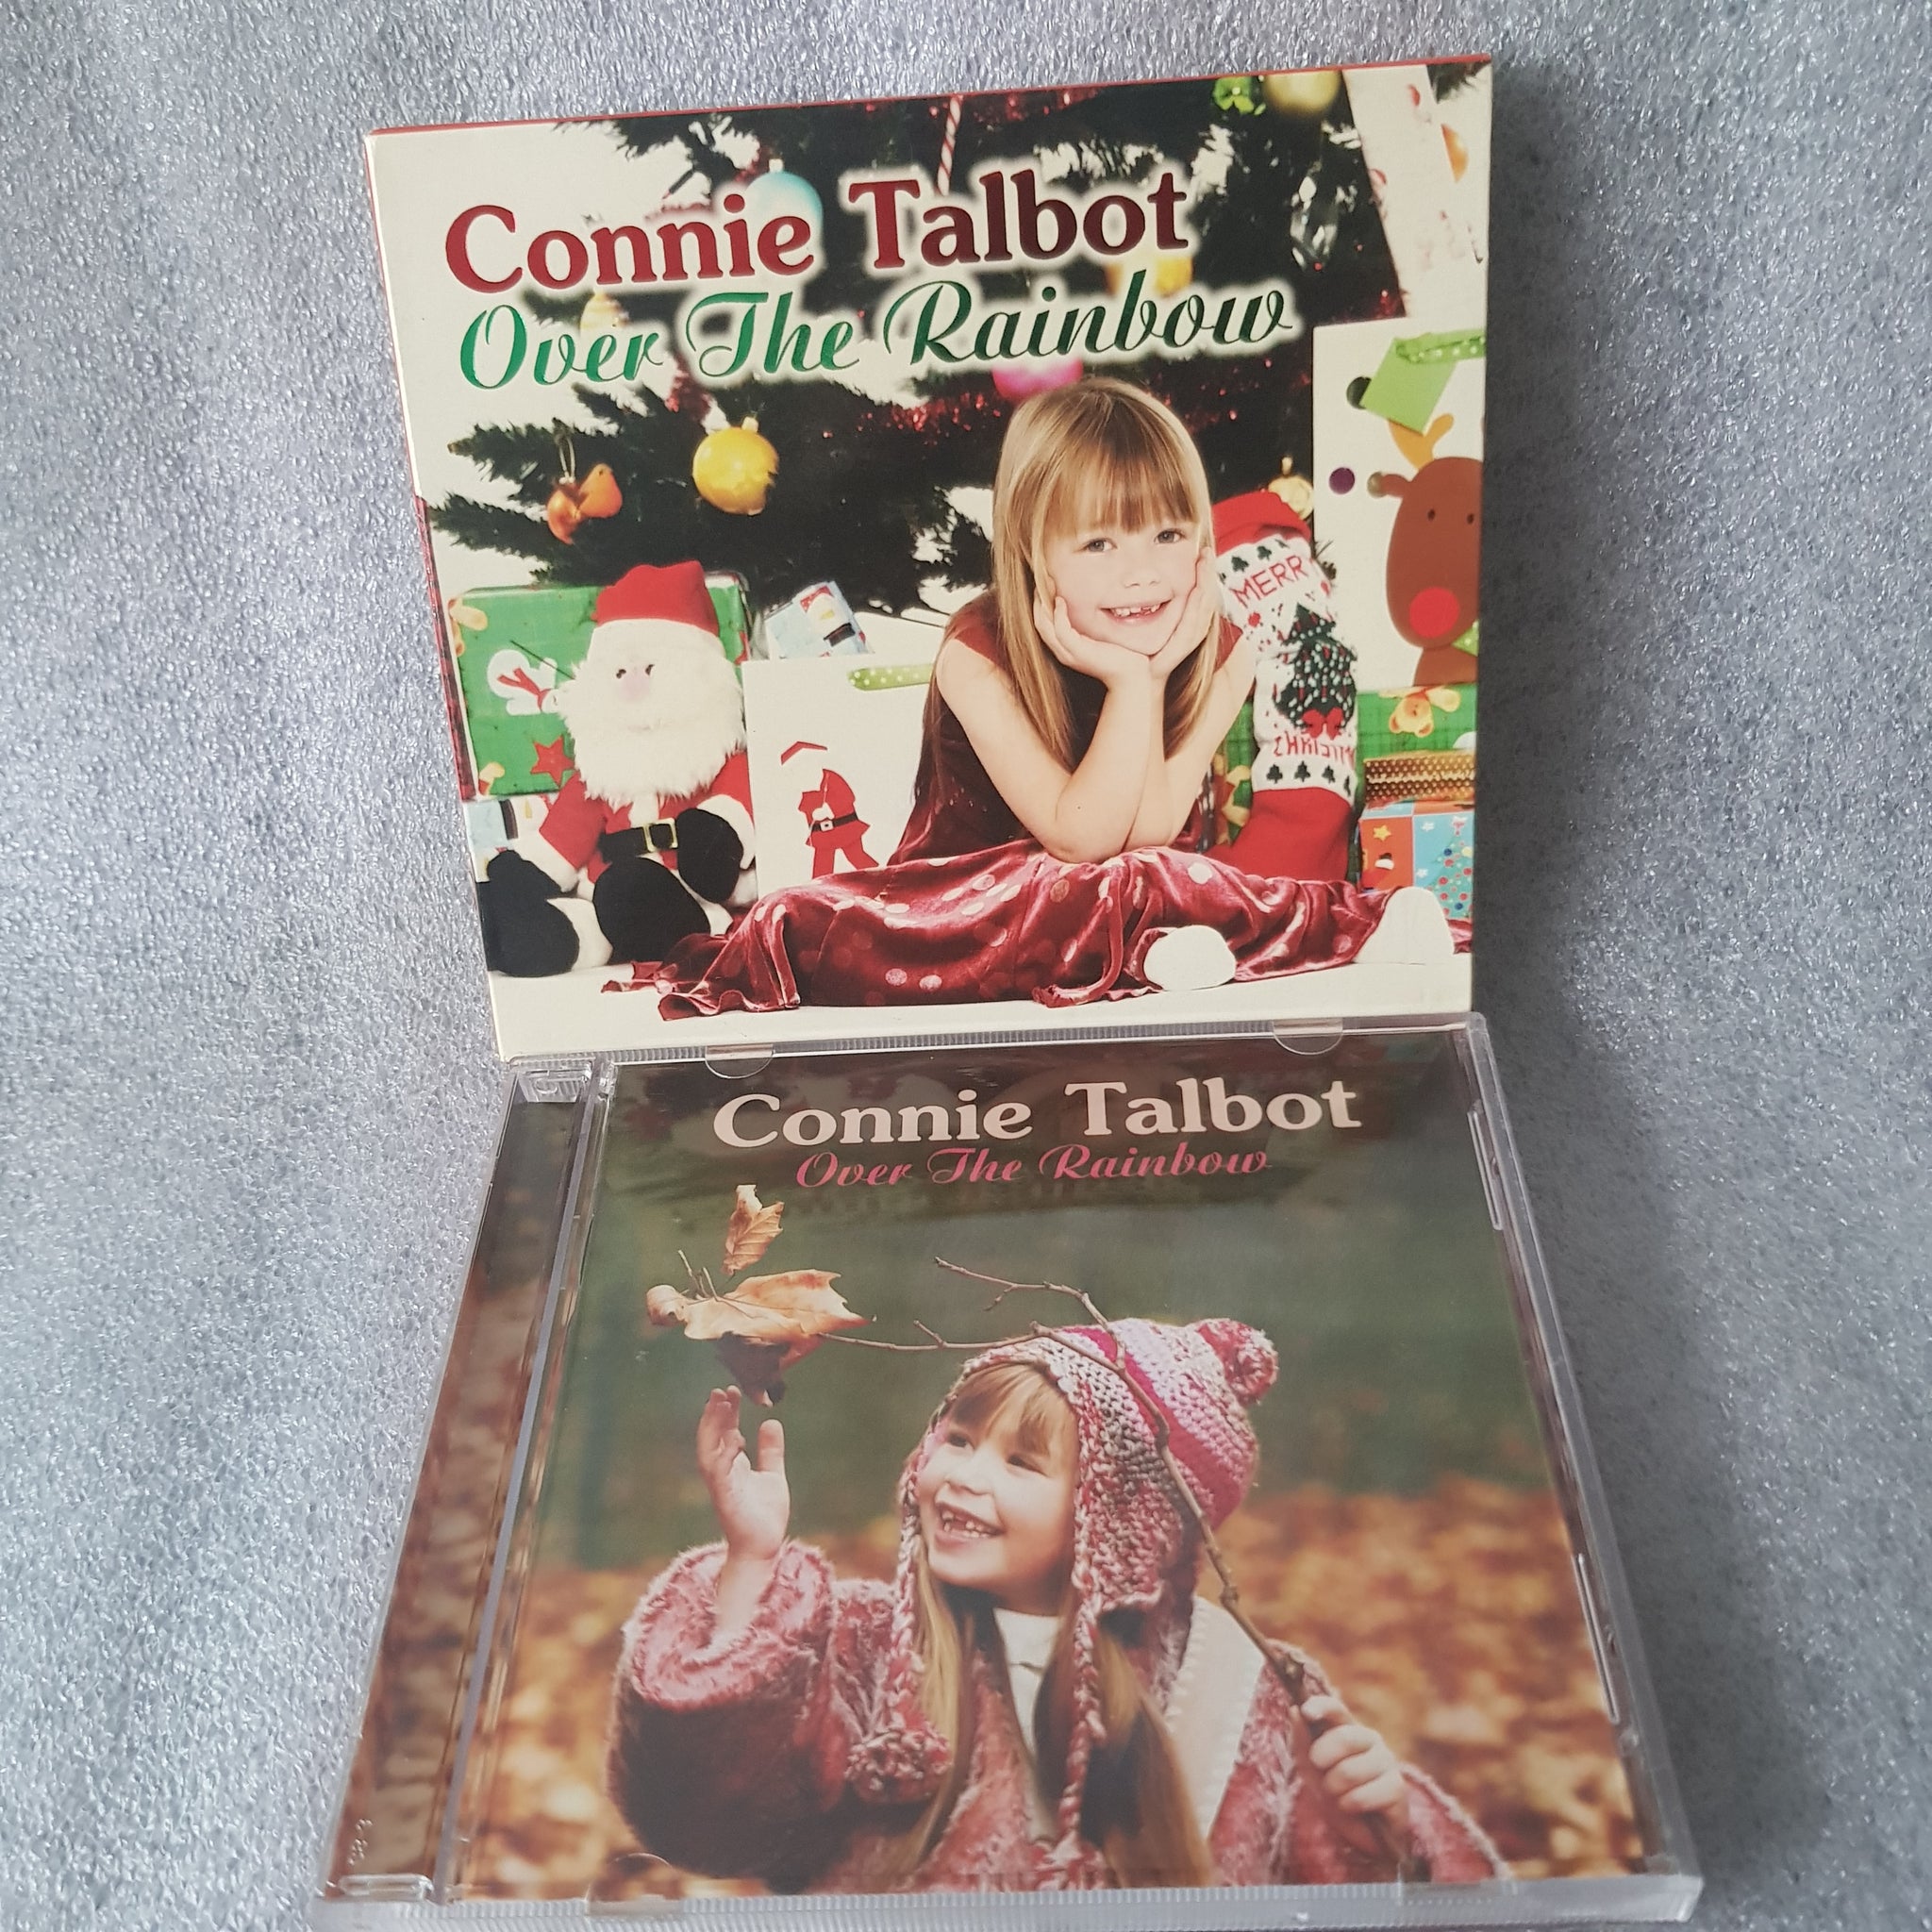 Over the Rainbow by Connie Talbot, CD